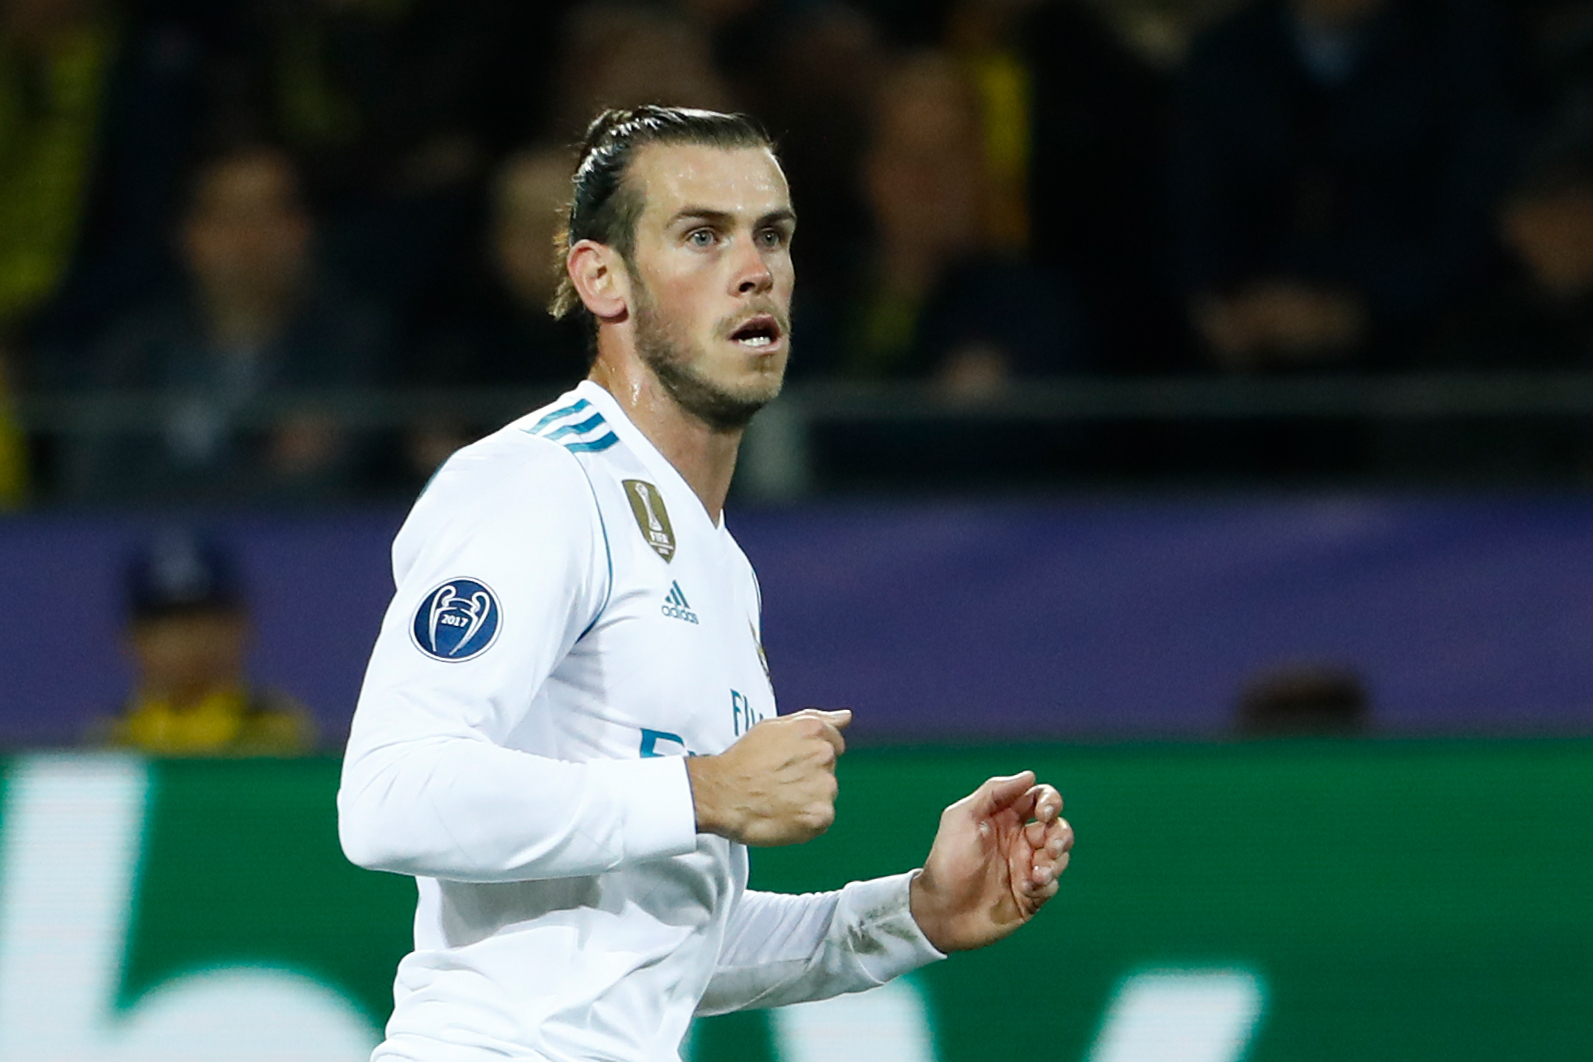 Real Madrid's forward from Wales Gareth Bale celebrates scoring the opening goal  during the UEFA Champions League Group H football match BVB Borussia Dortmund v Real Madrid in Dortmund, western Germany on September 26, 2017. / AFP PHOTO / Odd ANDERSEN        (Photo credit should read ODD ANDERSEN/AFP/Getty Images)